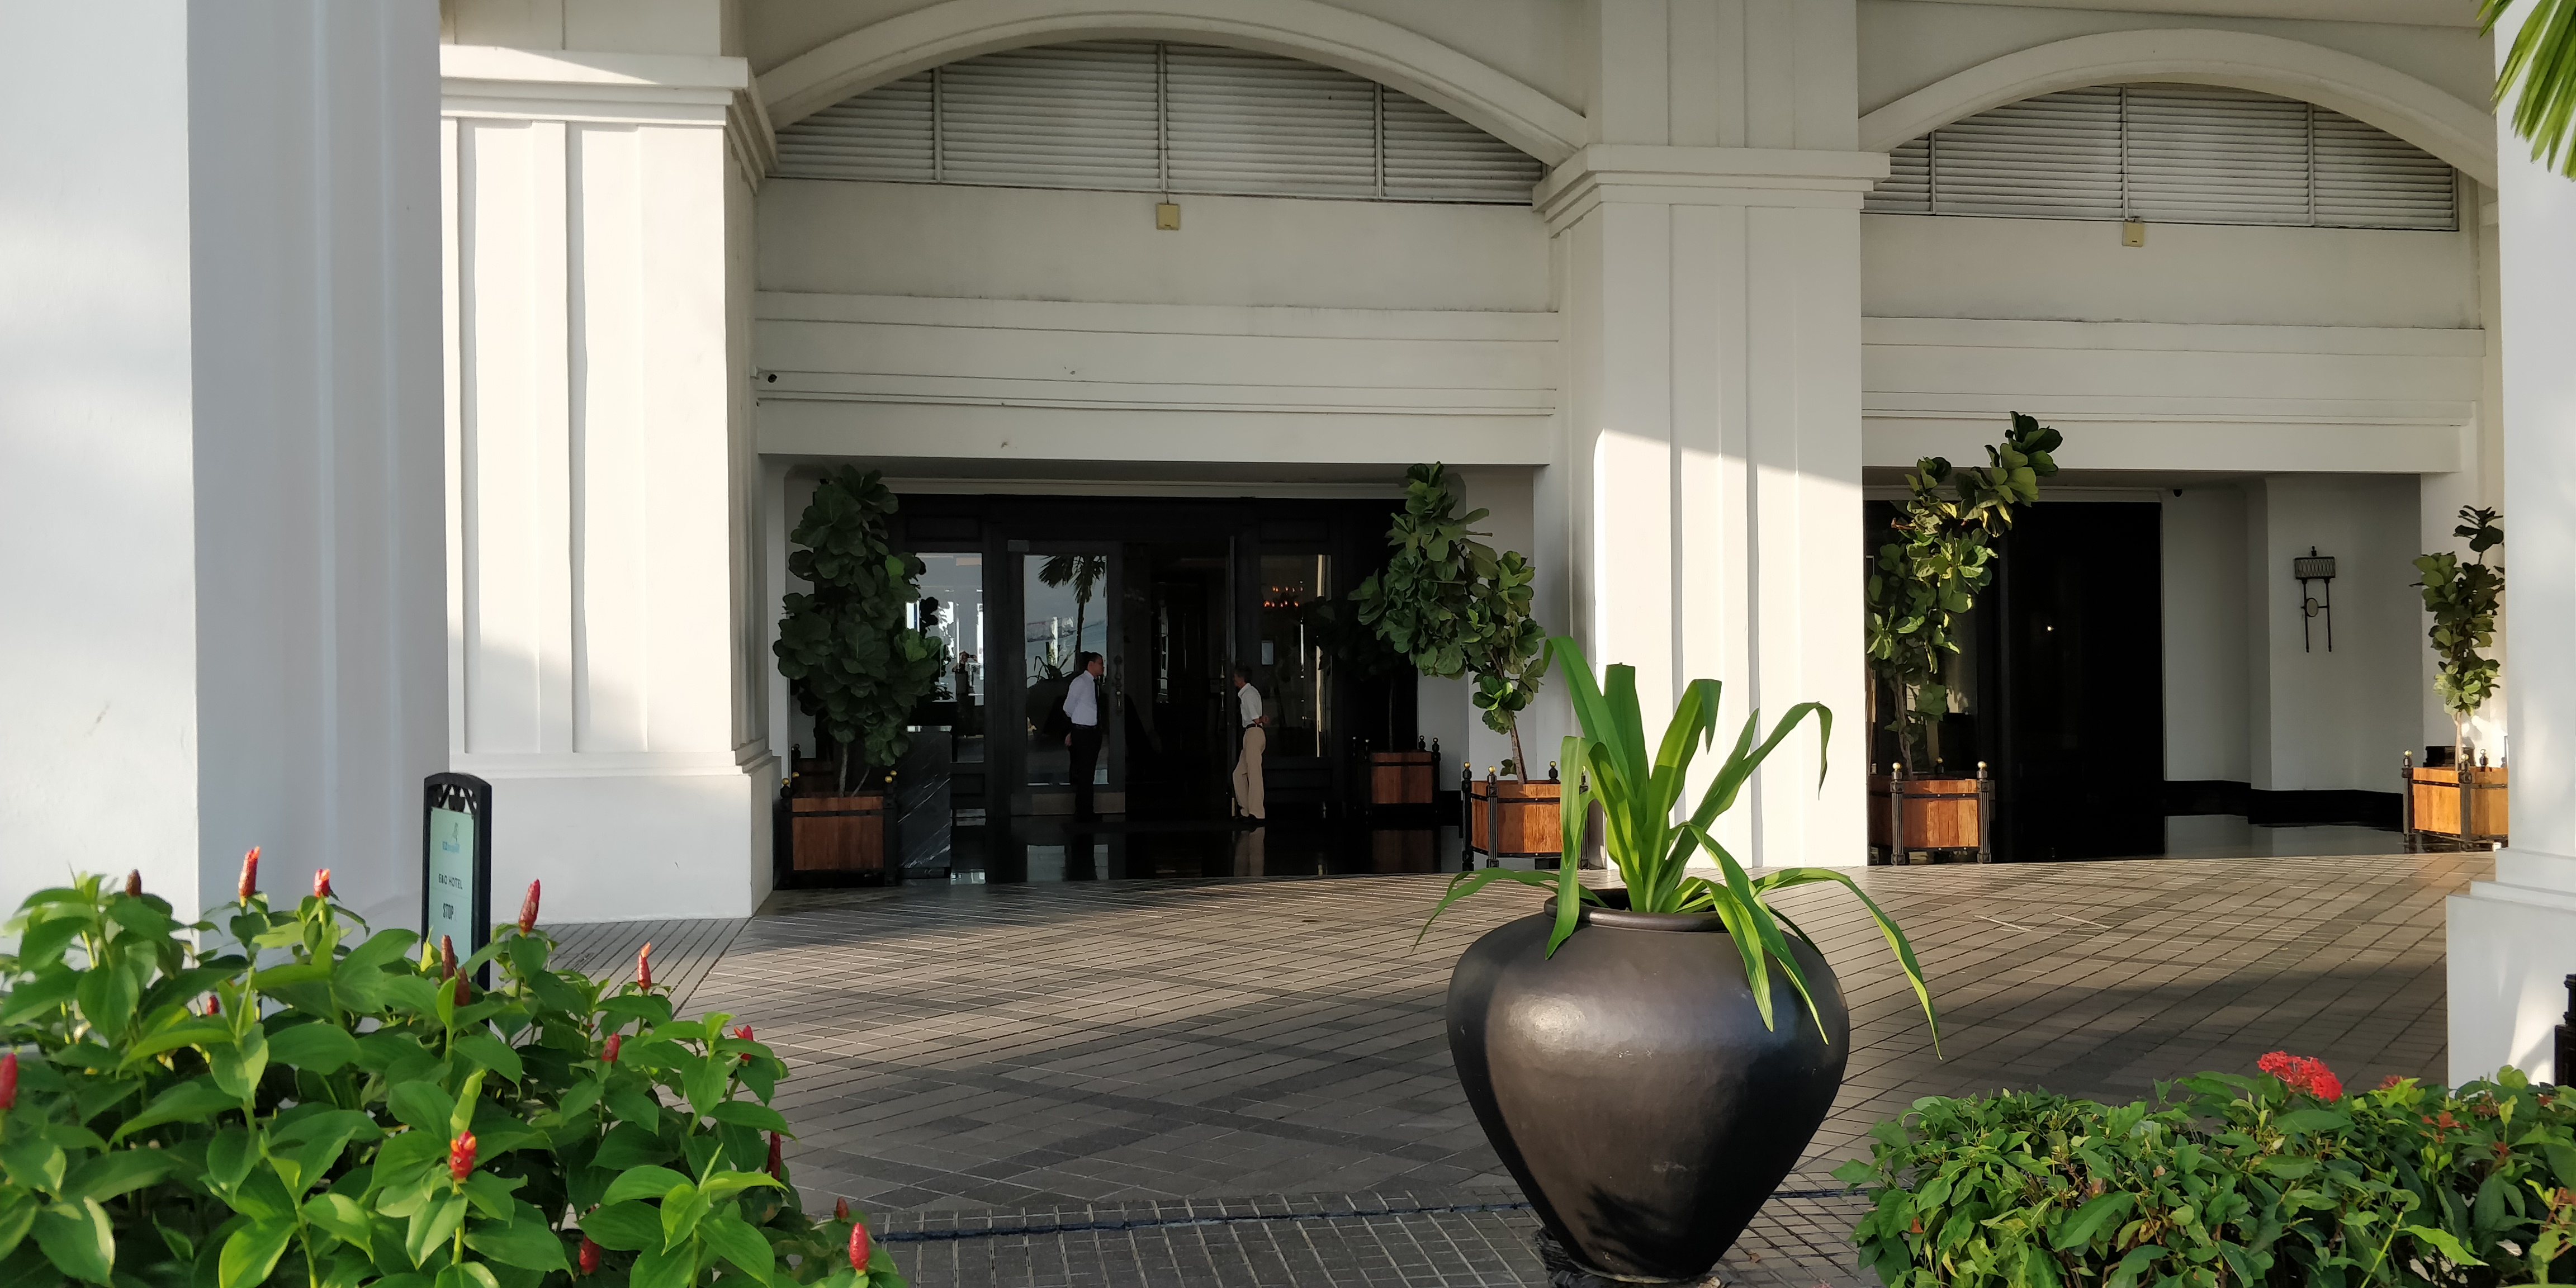  A PICTURE OF THE ENTRANCE TO THE E & O HOTEL PENANG